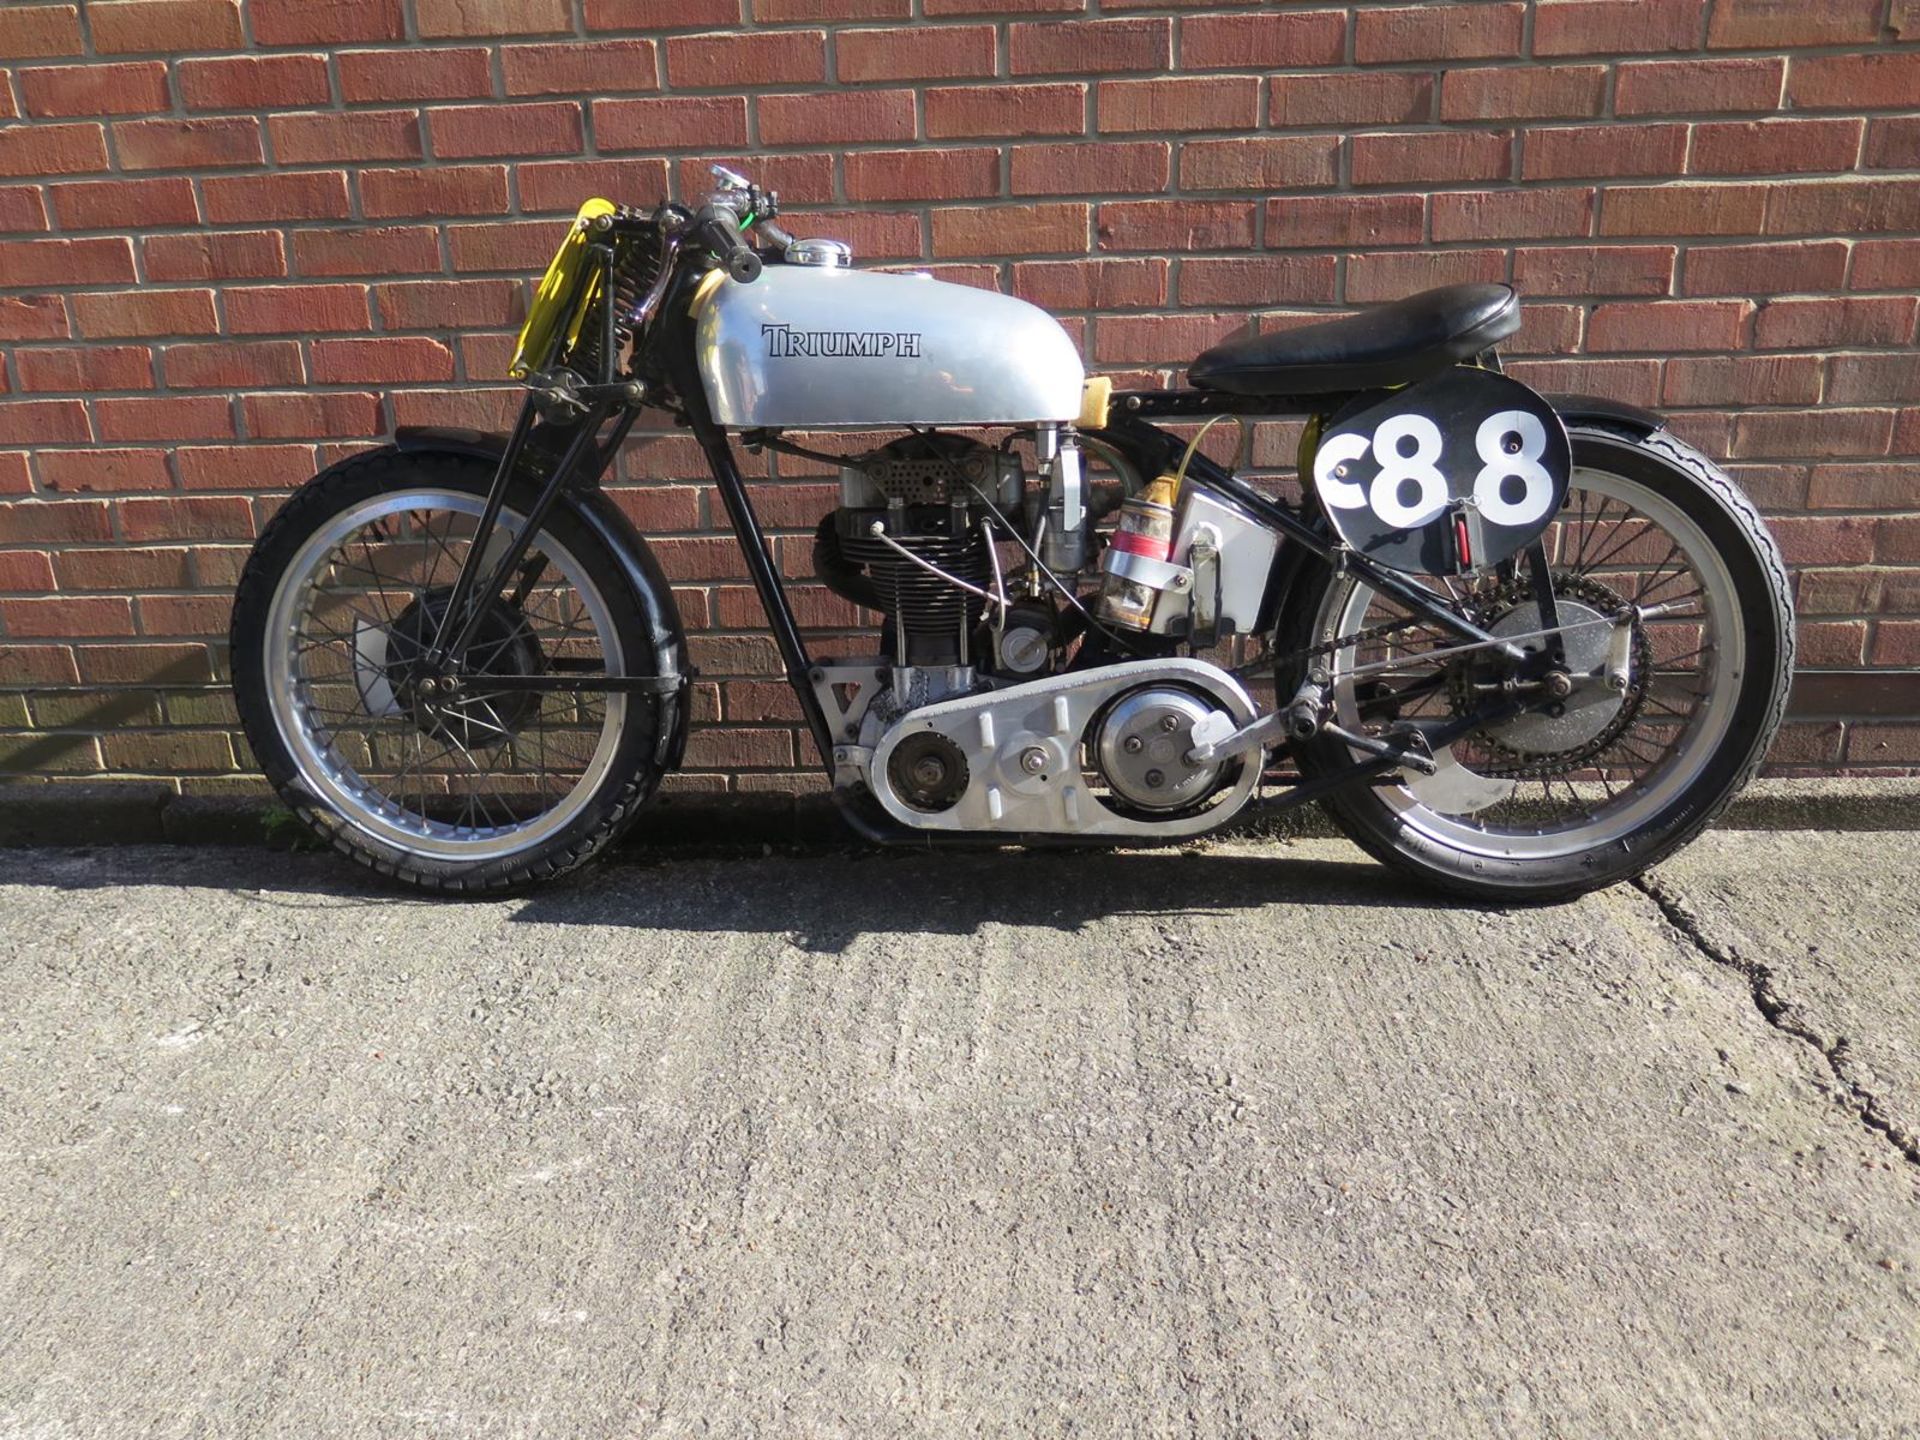 A 1937 Triumph Tiger 70 400 Purchased new in 1937 by Geoffrey Pollard Later converted for racing - Image 2 of 6